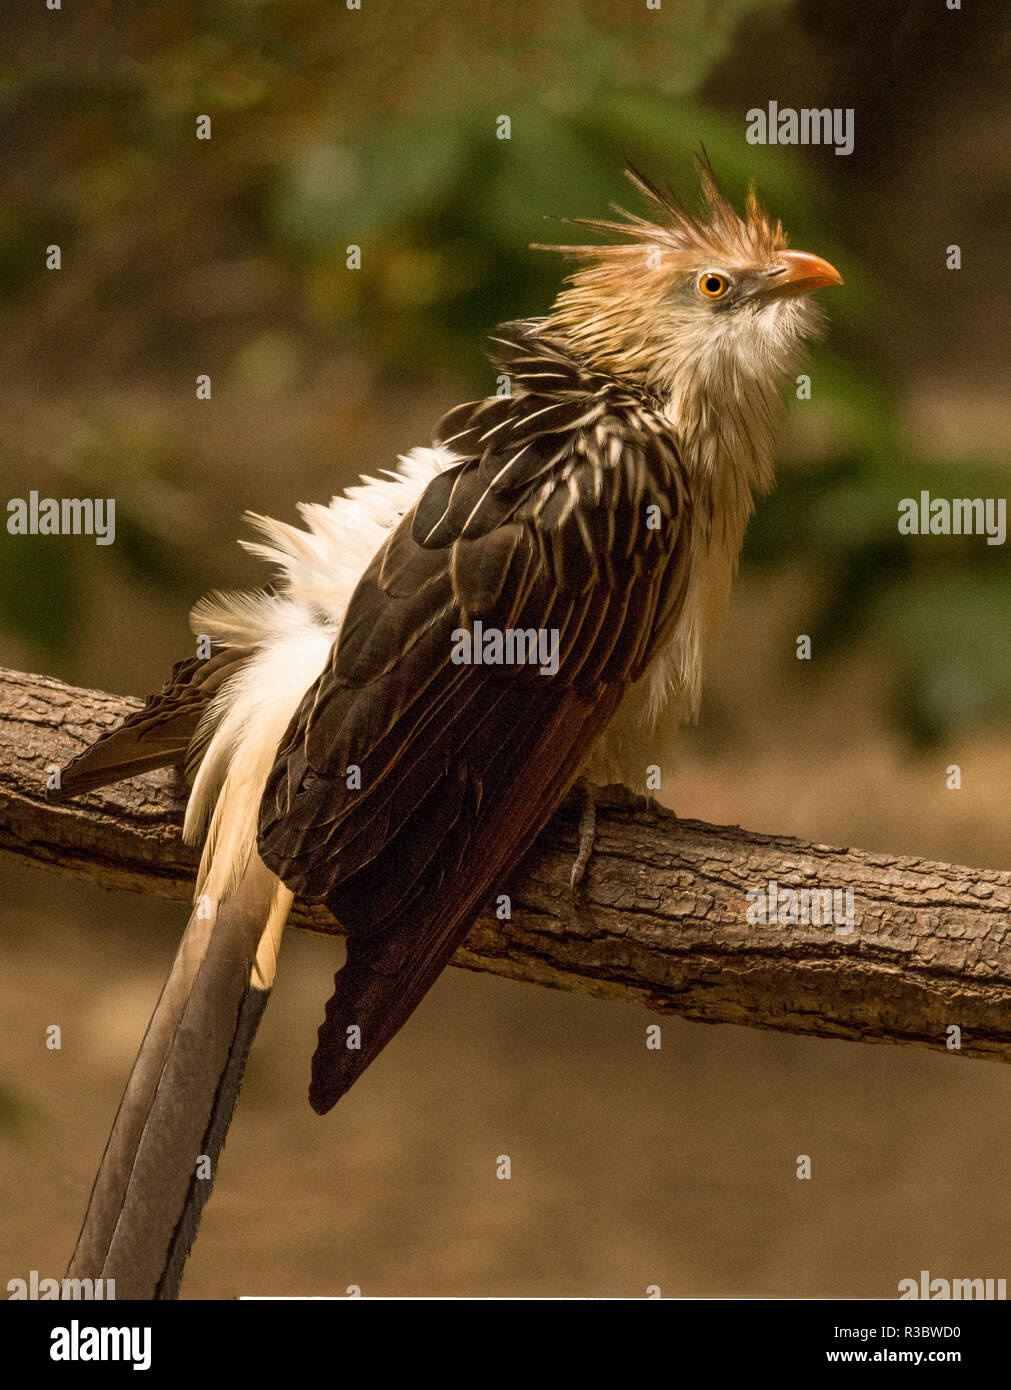 The Guira Cuckoo (Guira guira) is a native of South America.This bird was  photographed in captivity in South-west France. Stock Photo